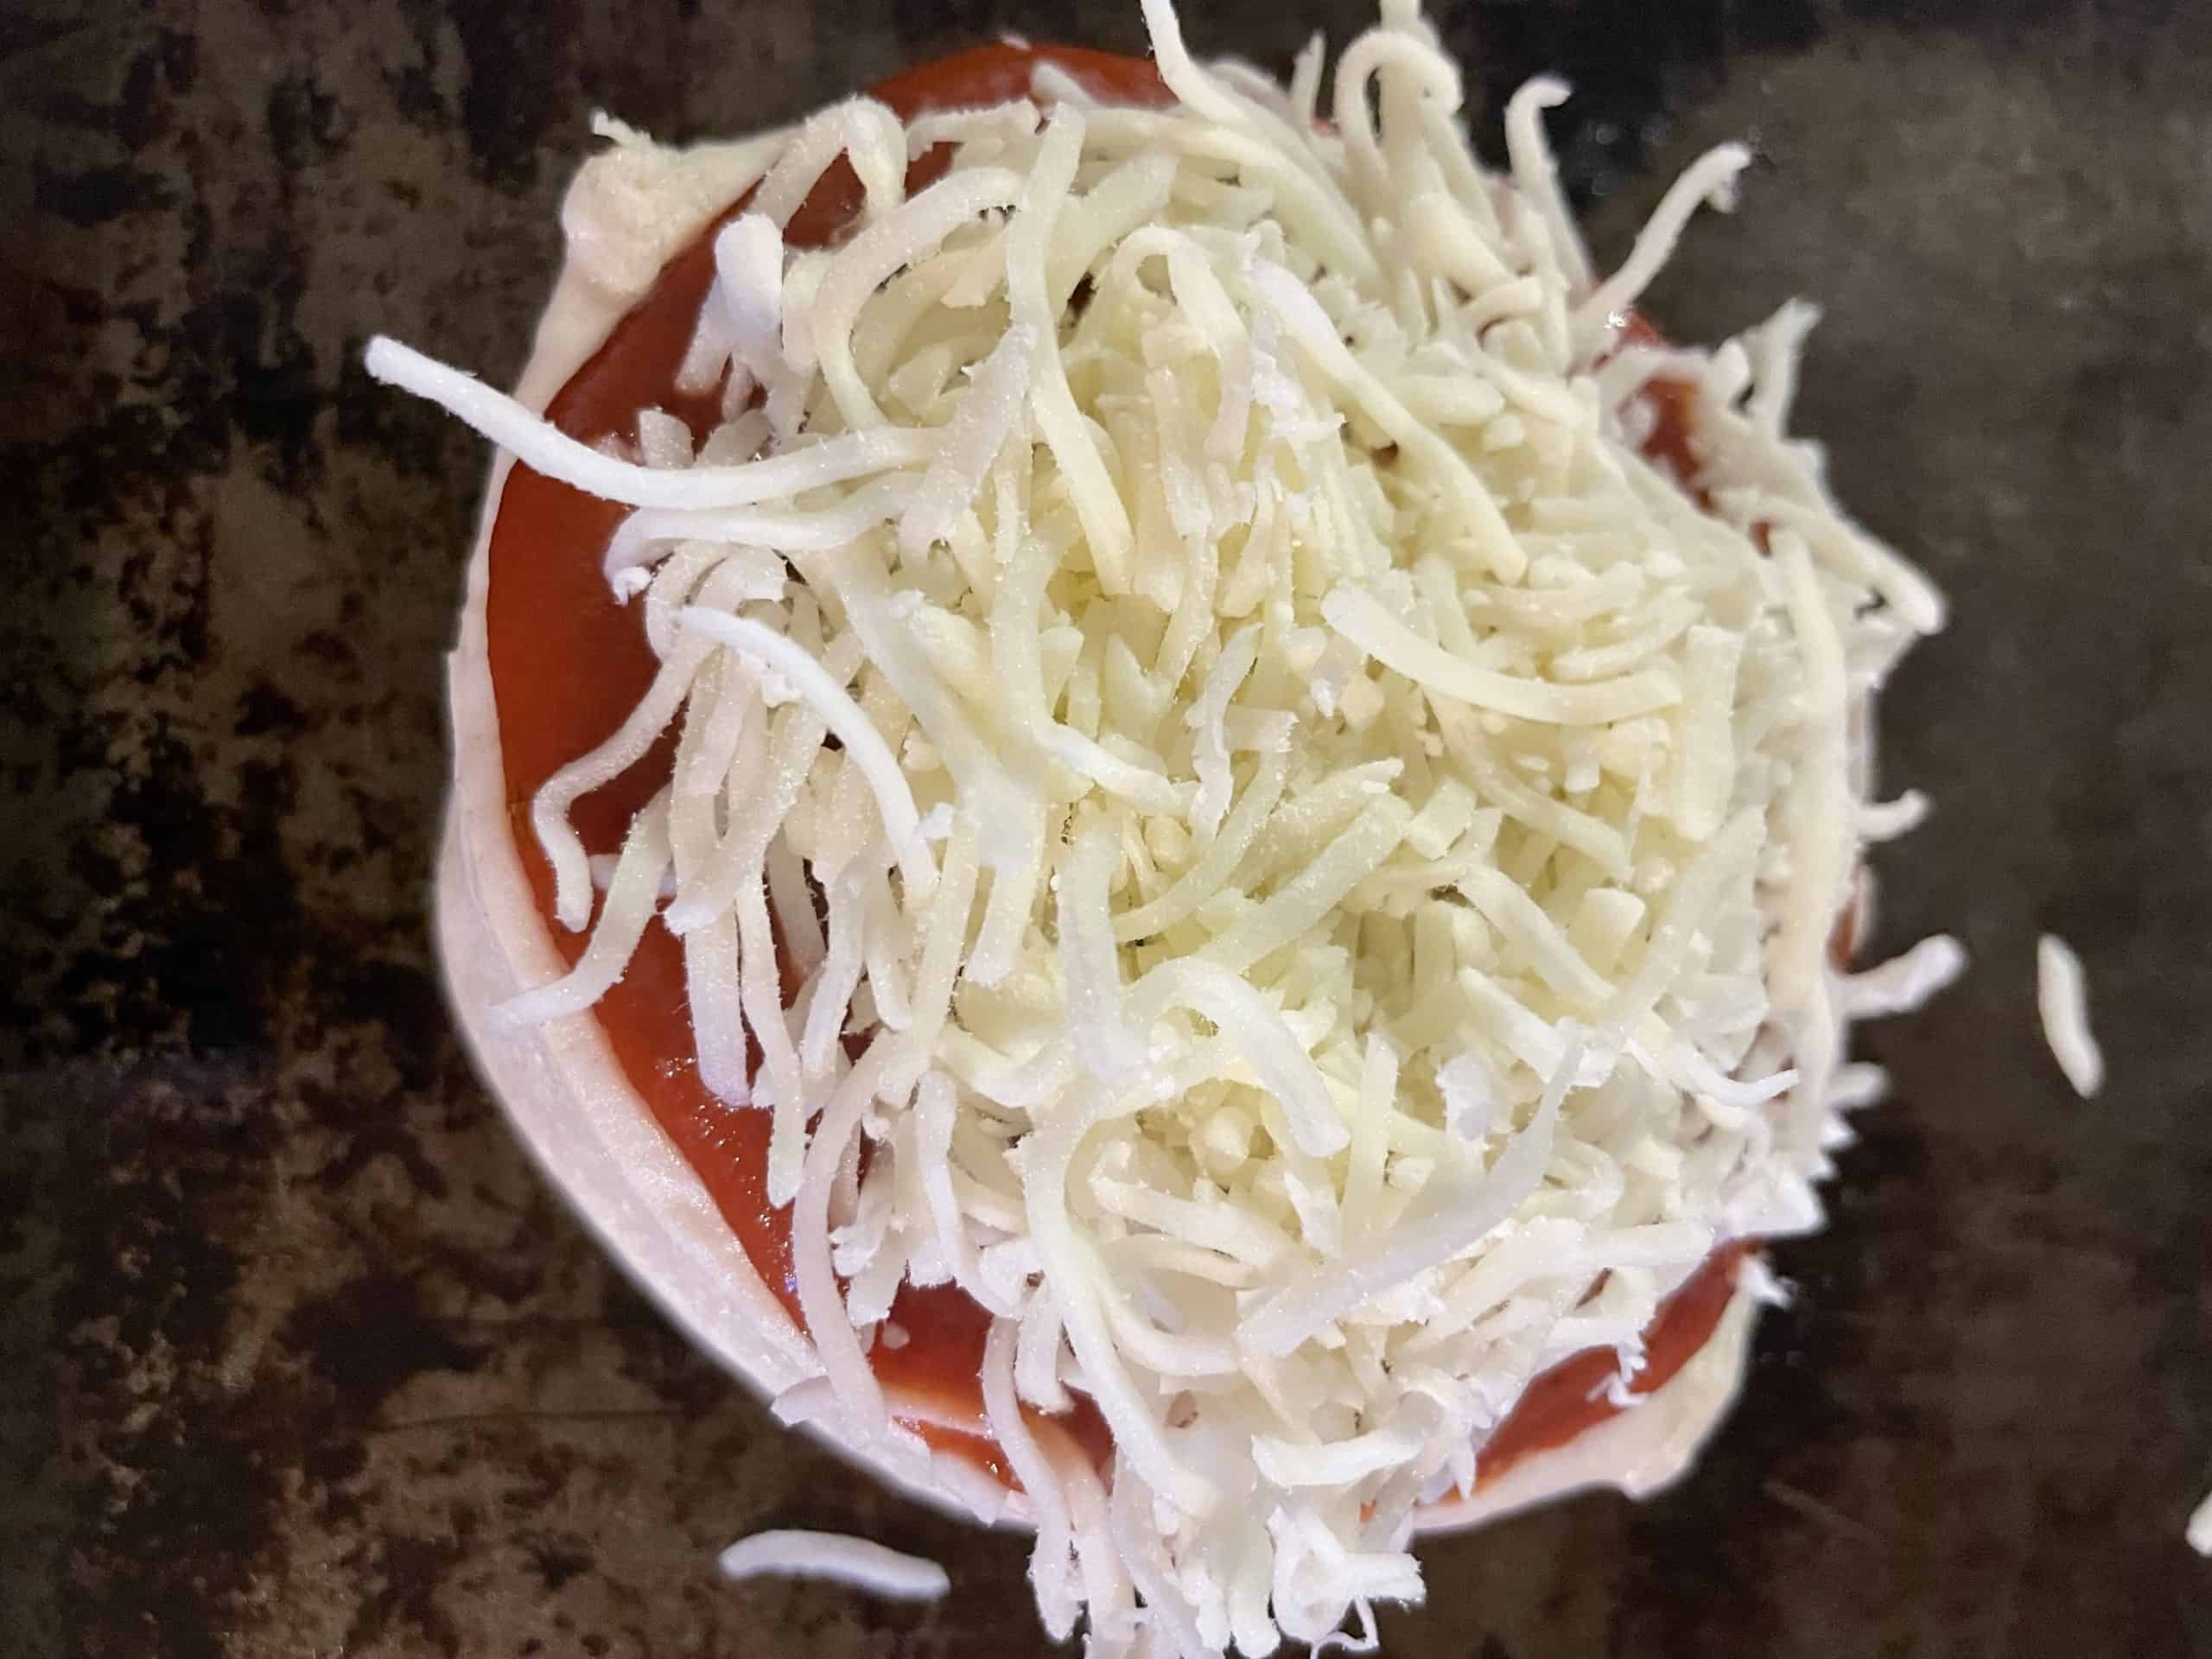 Crust topped with pizza sauce and shredded cheese.